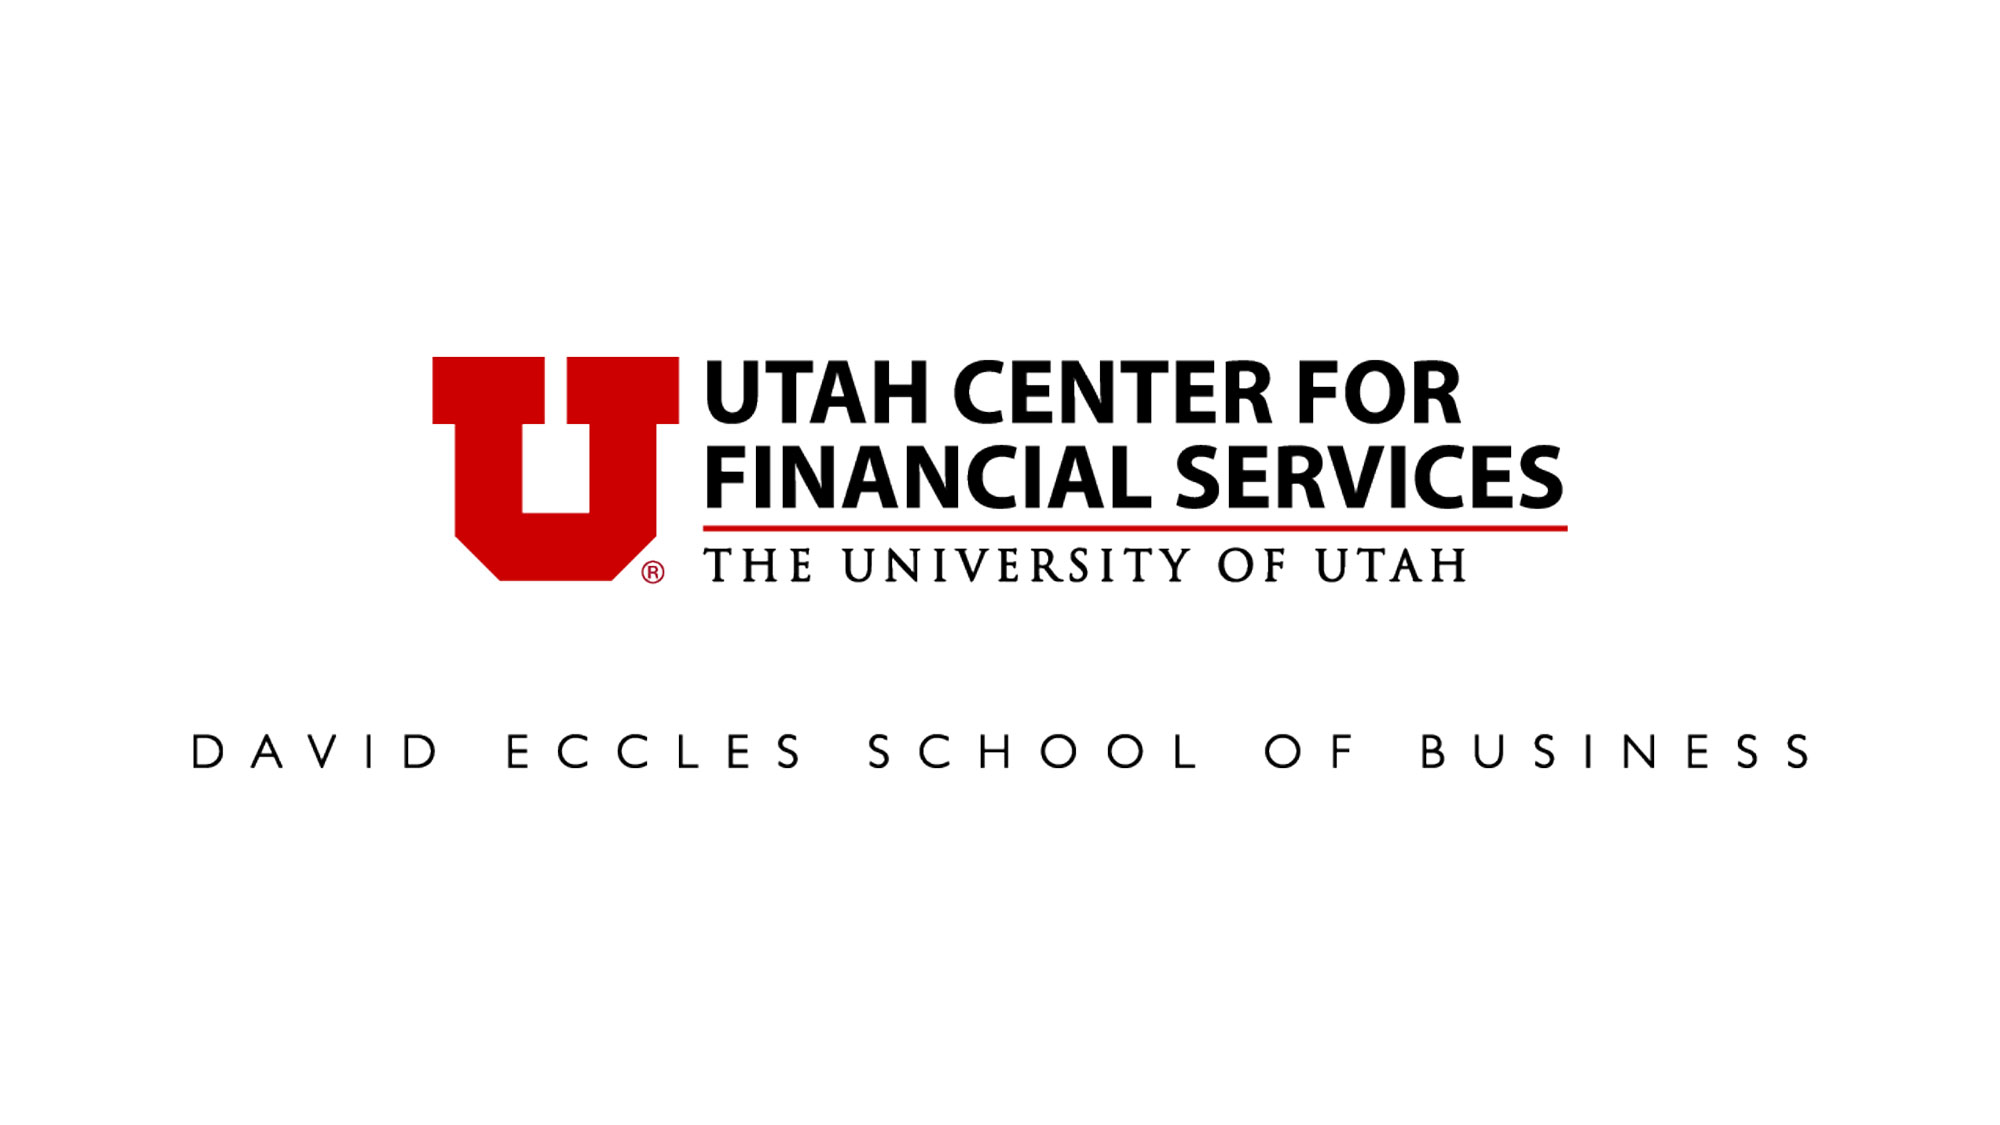 Utah Center for Financial Services